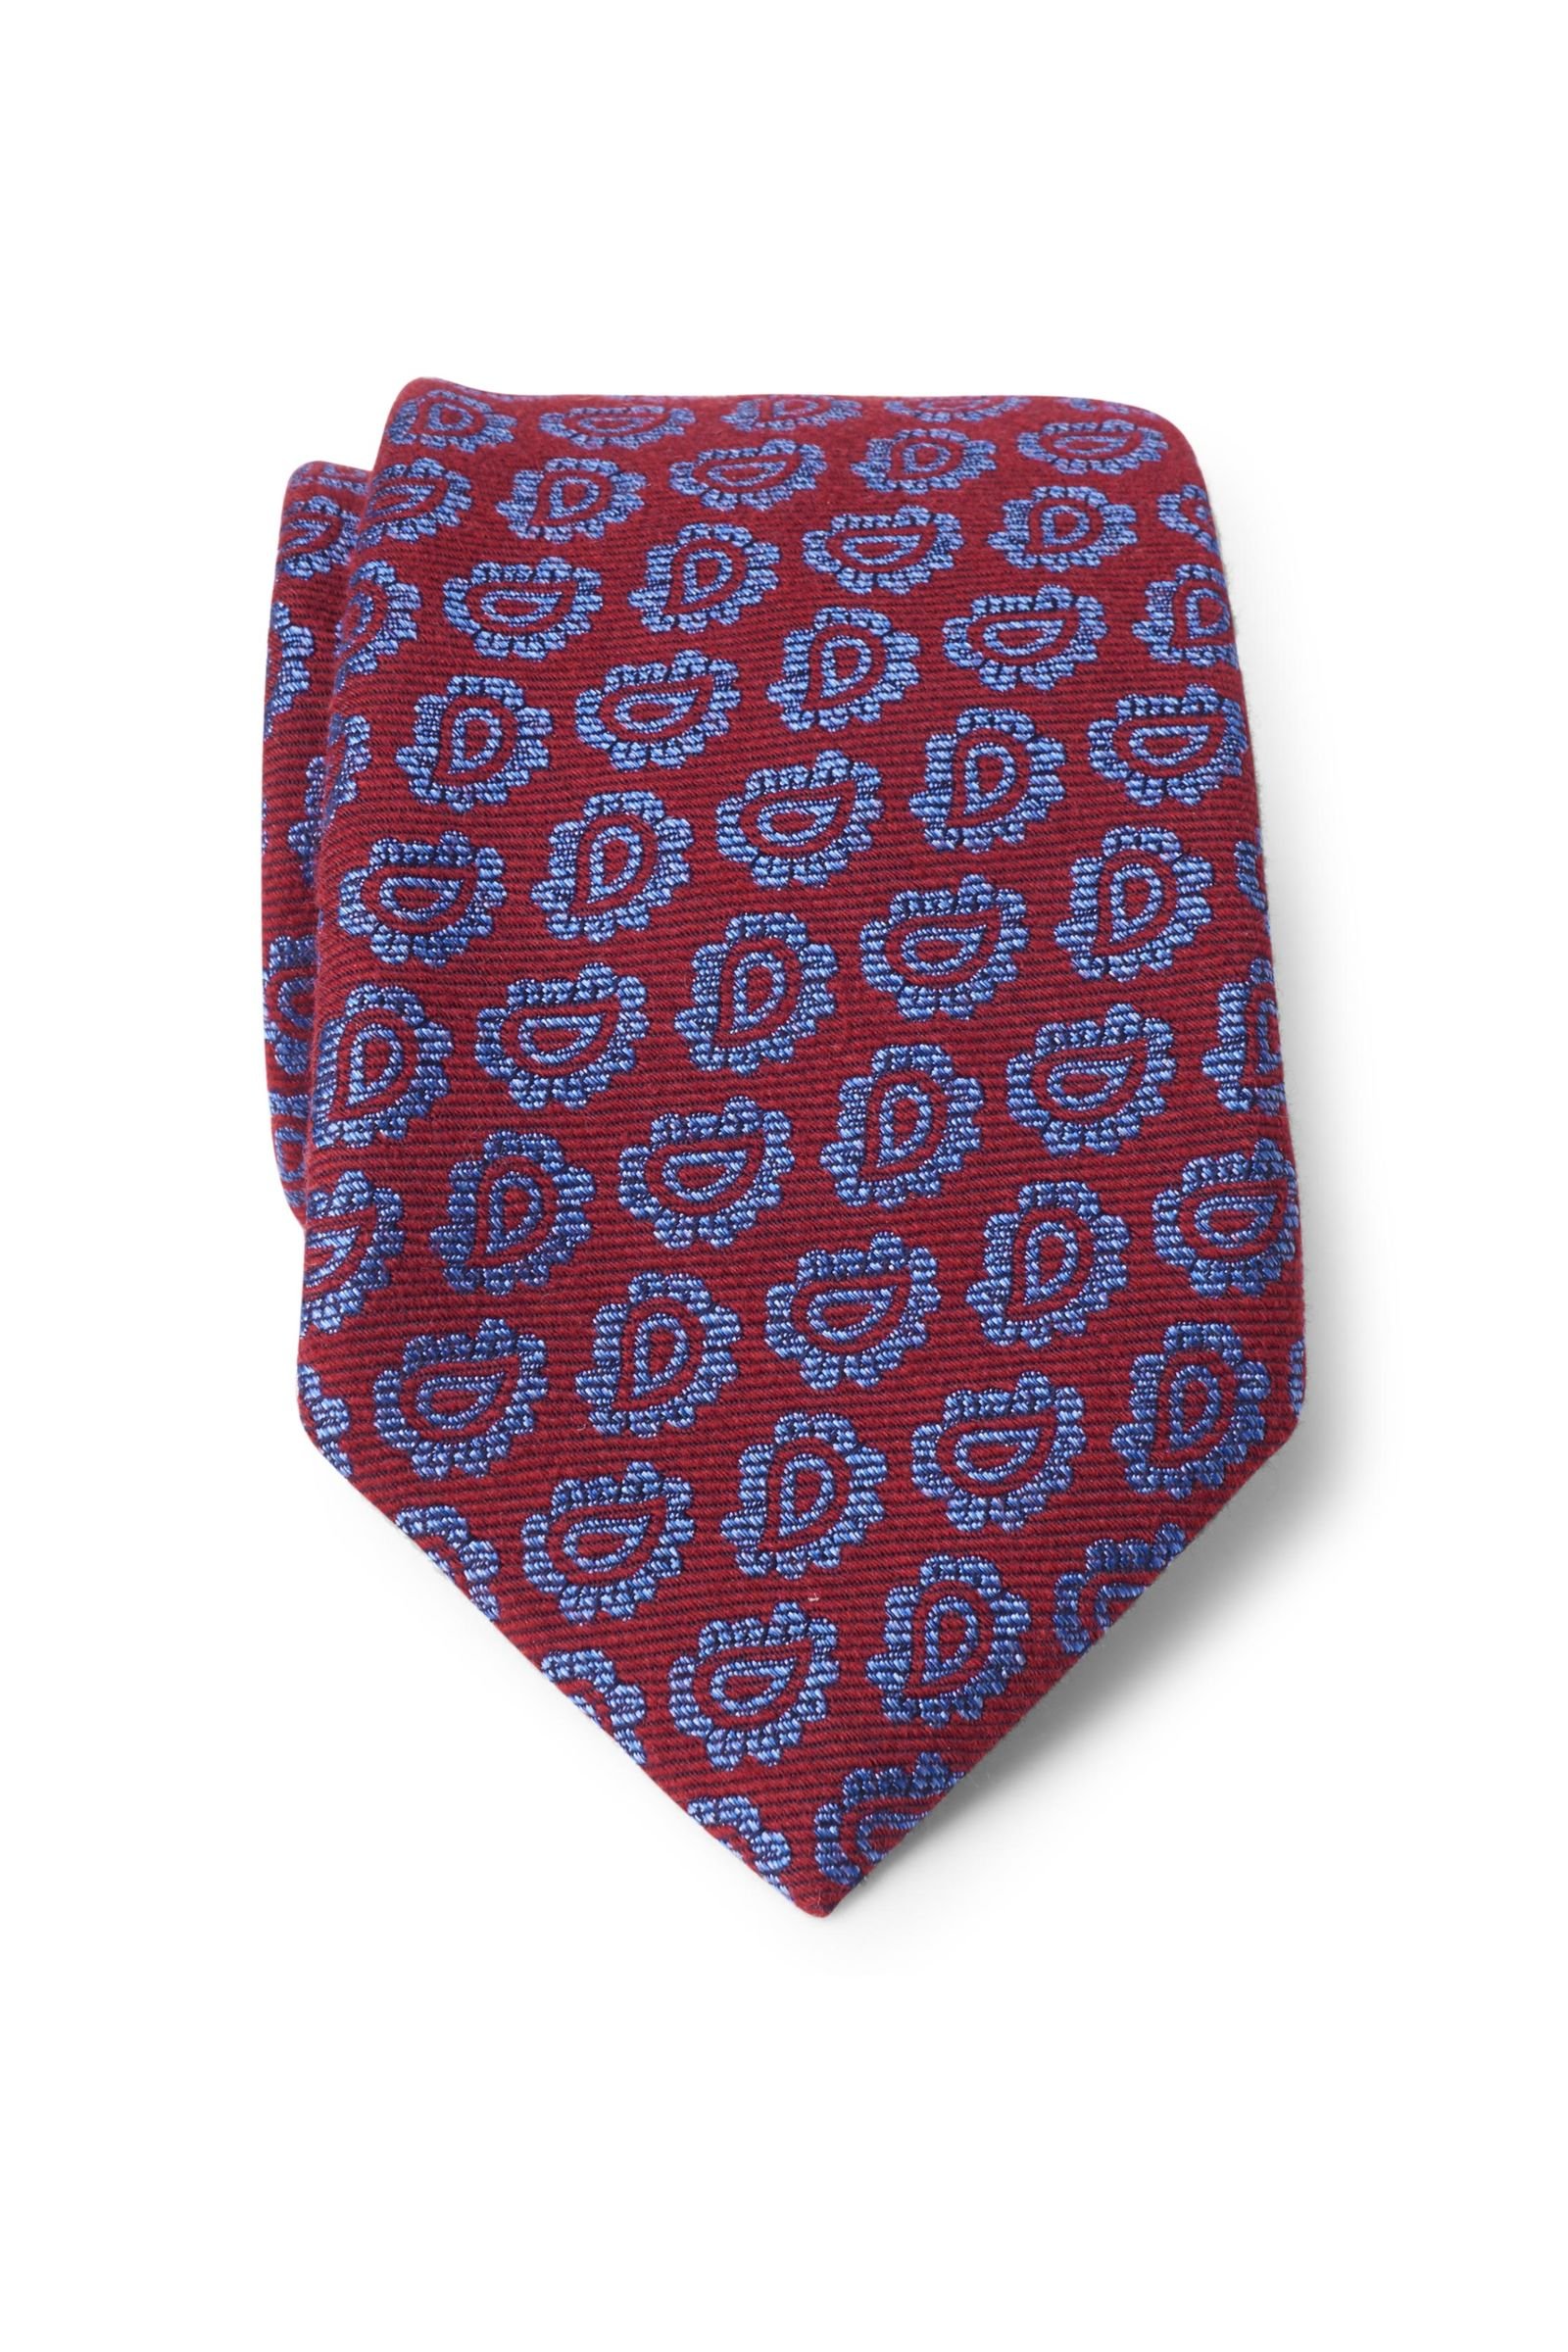 Tie red/light blue patterned